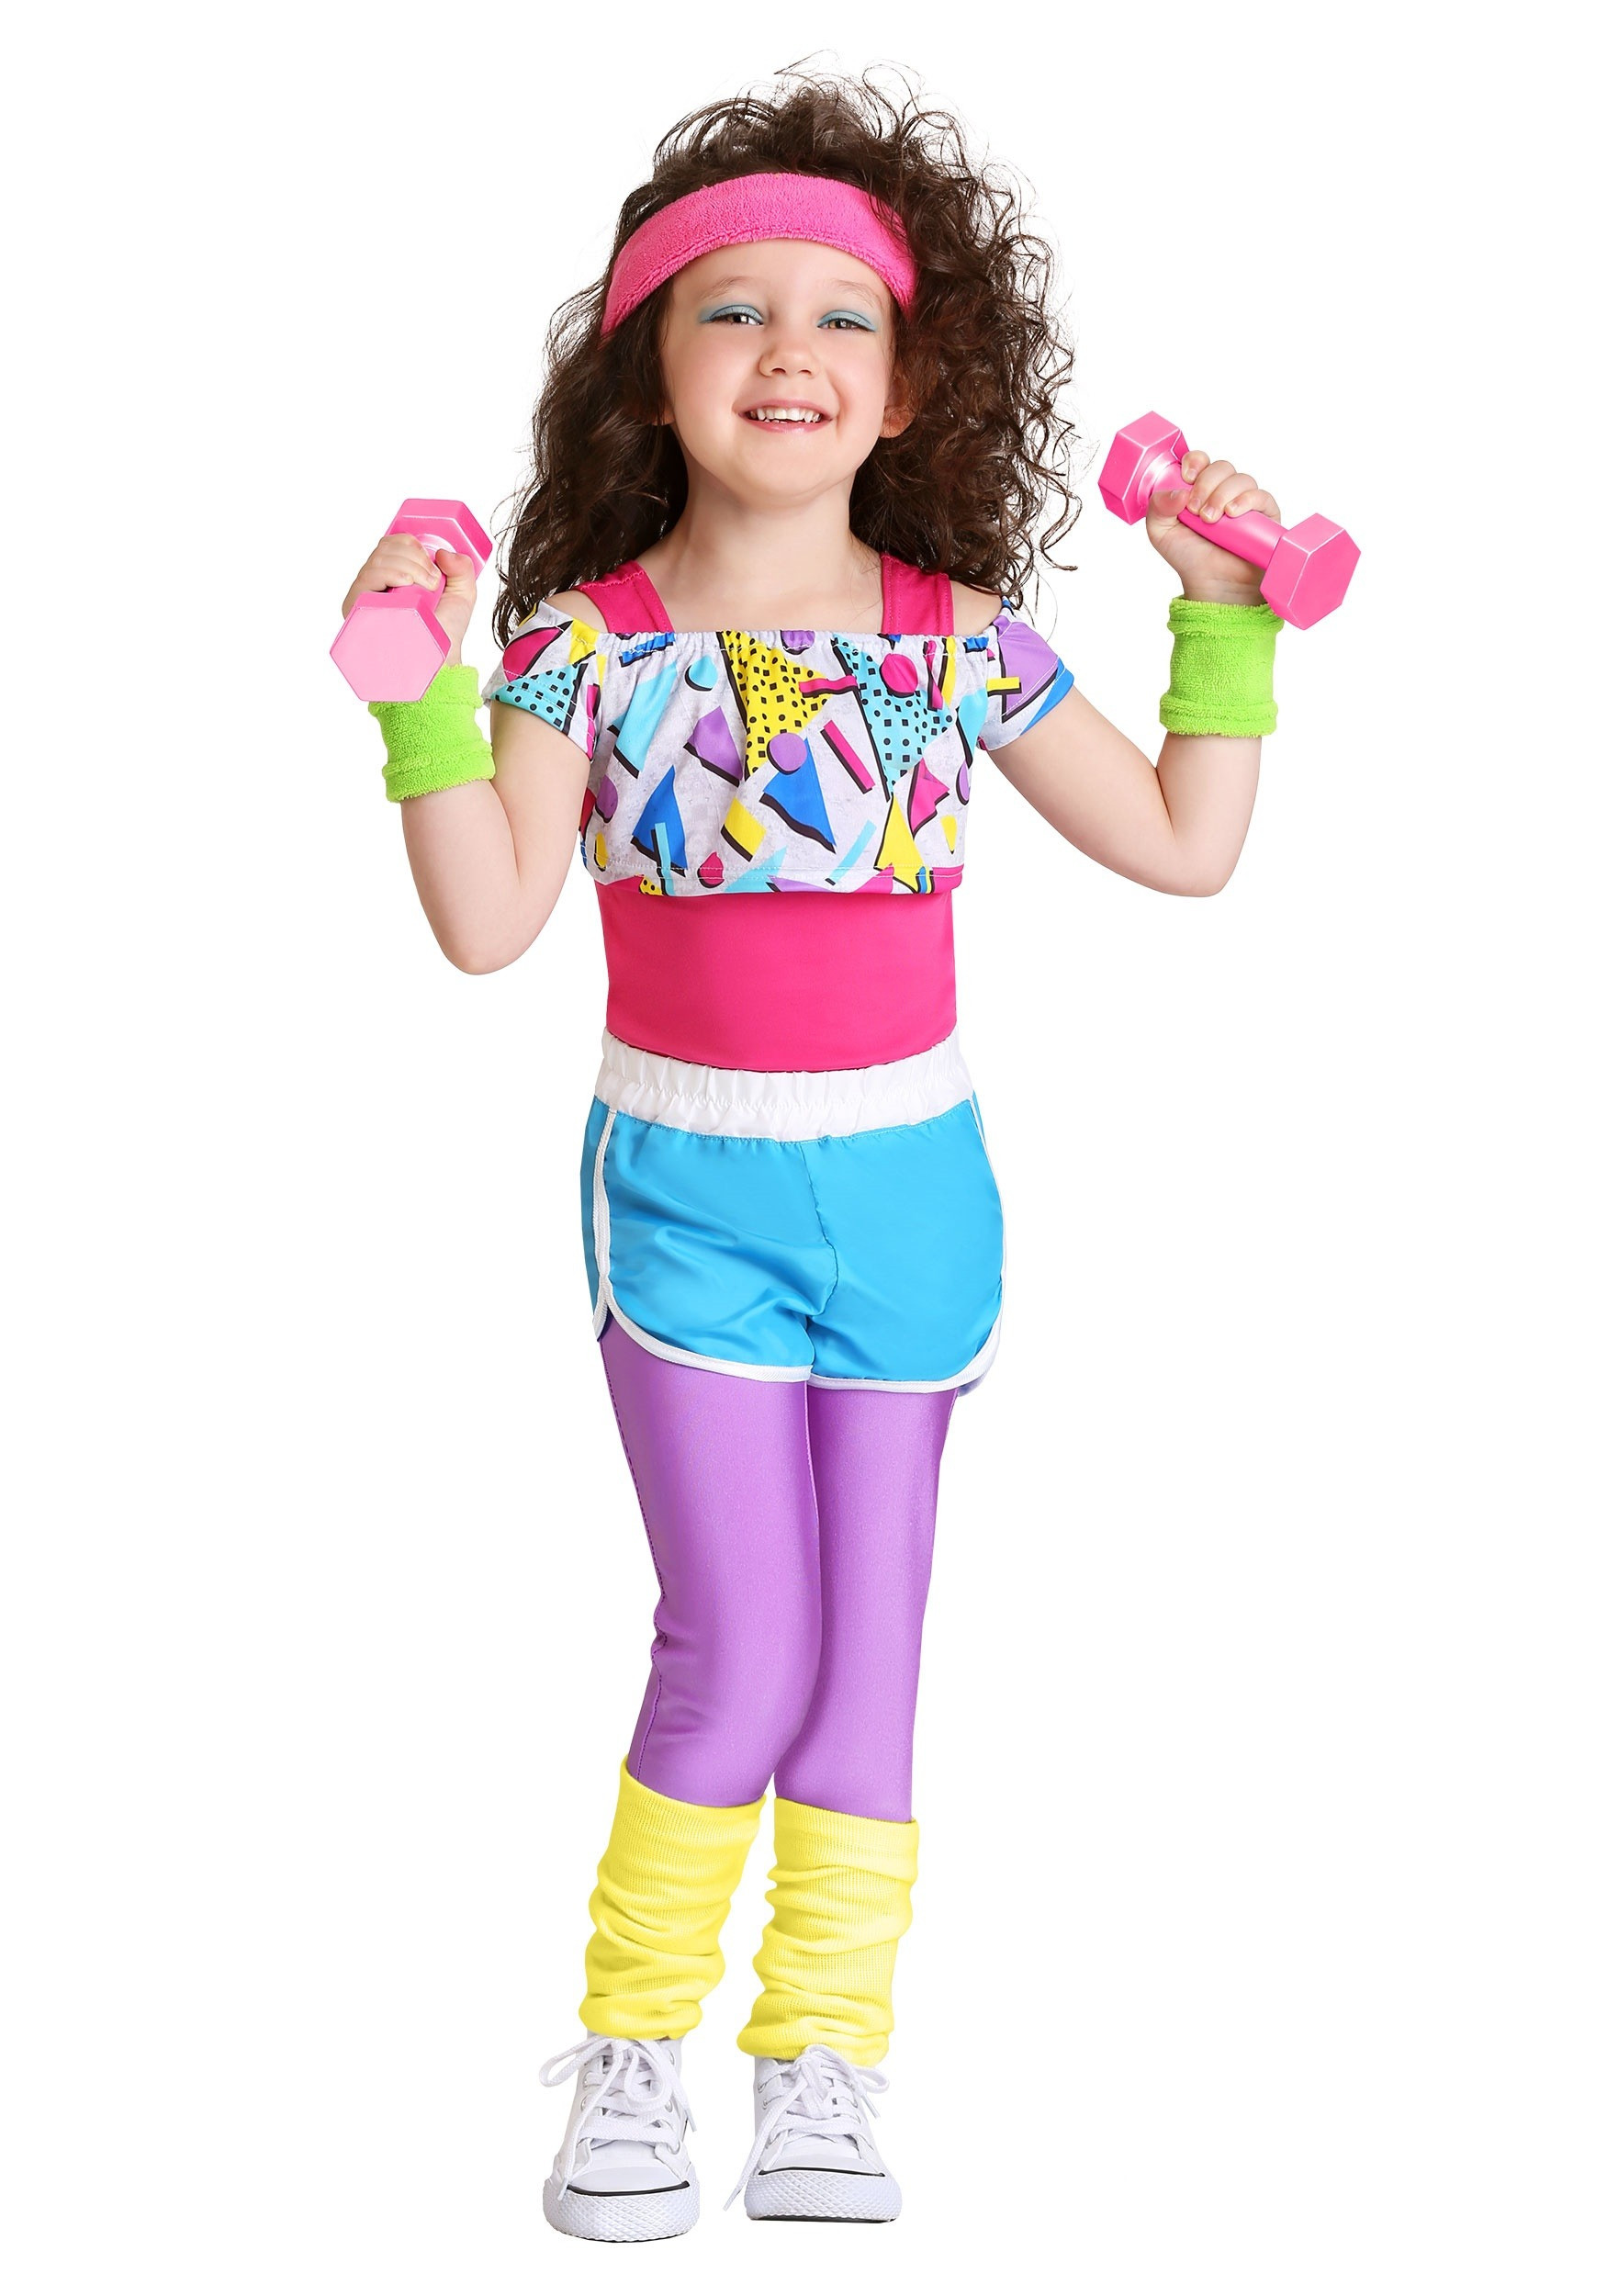 24 Of the Best Ideas for 80s Fashion for Kids – Home, Family, Style and ...